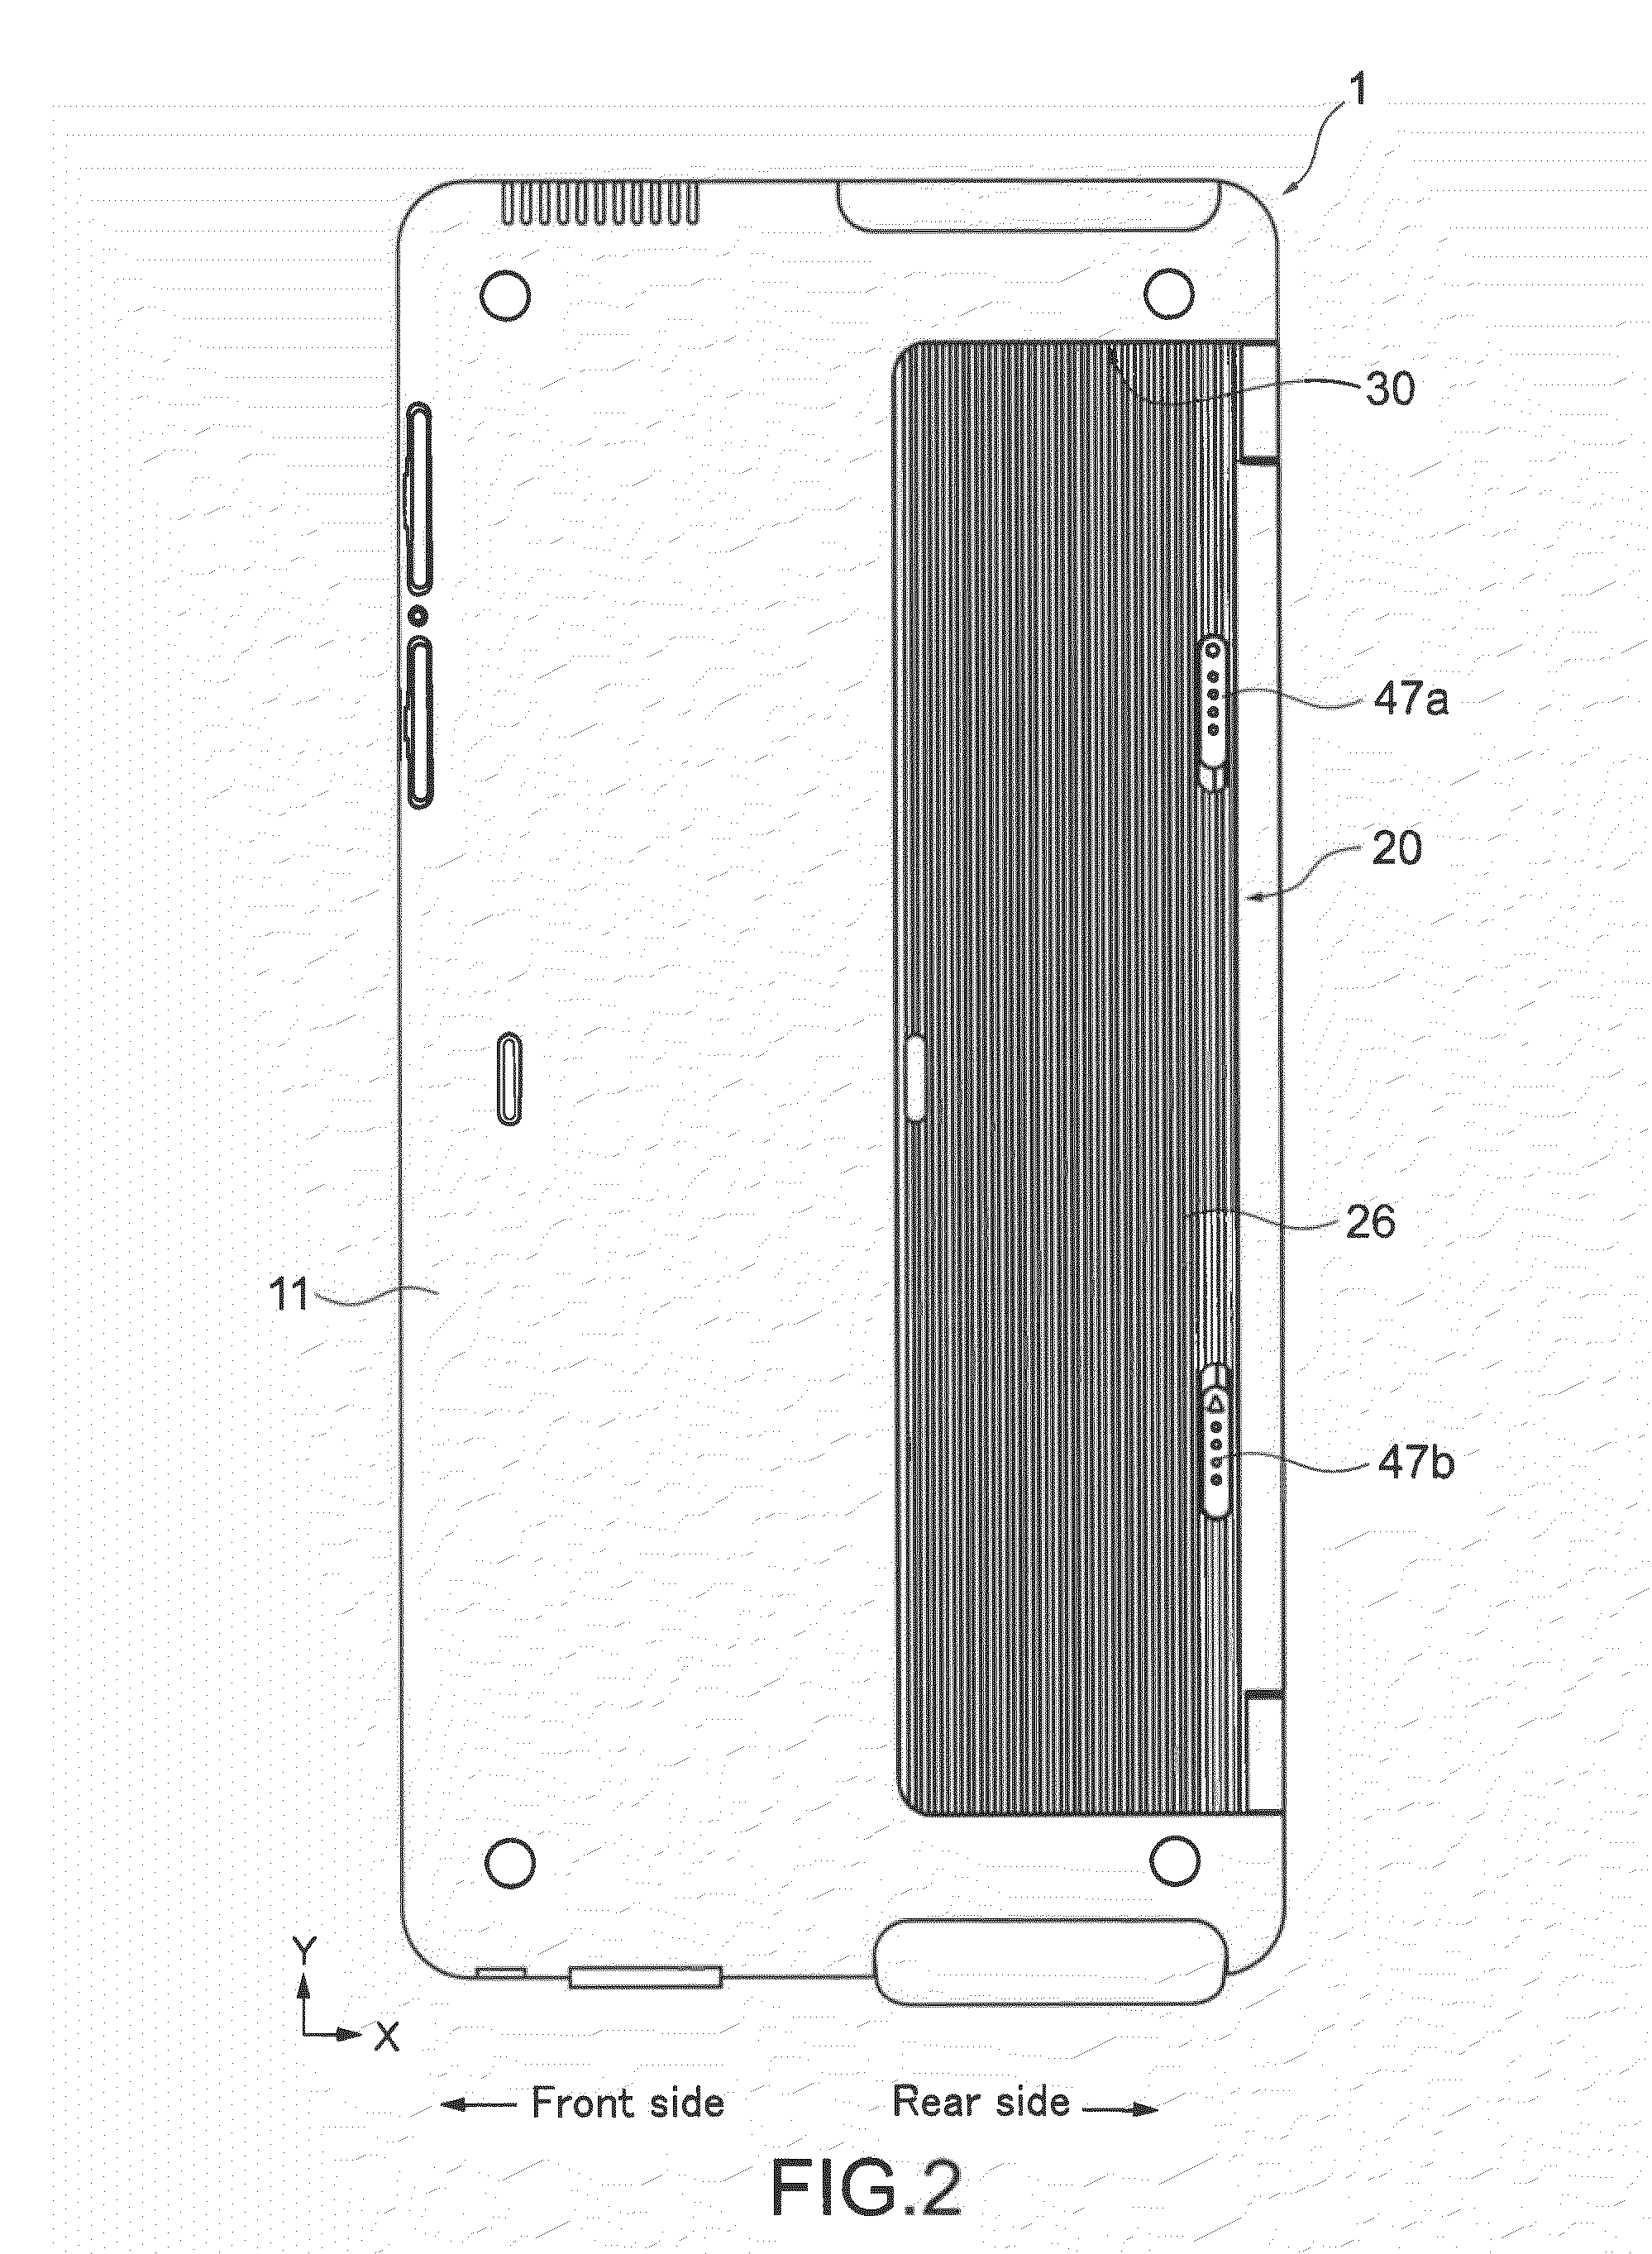 Electronic apparatus and battery pack